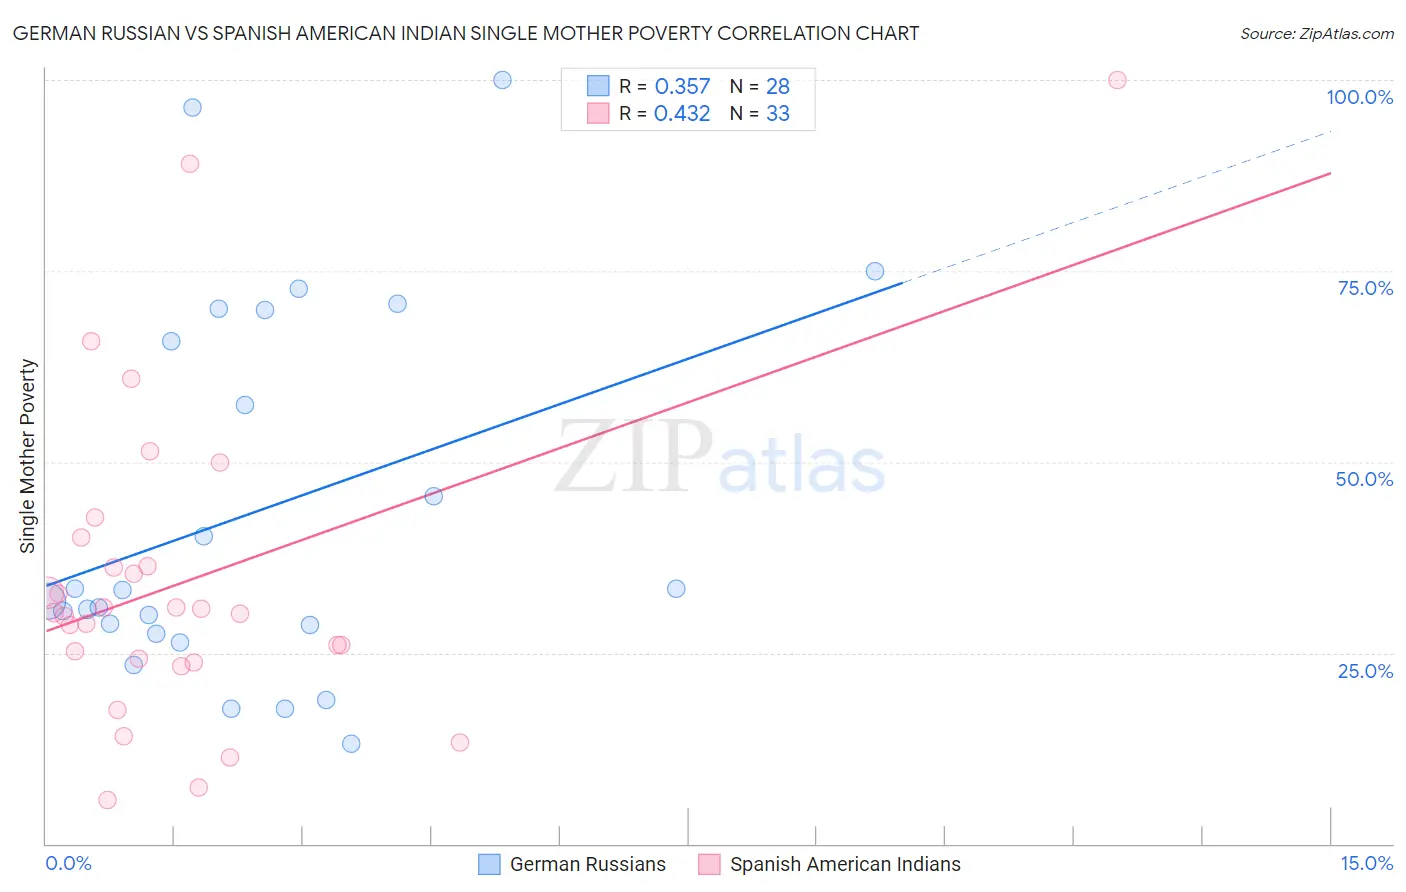 German Russian vs Spanish American Indian Single Mother Poverty